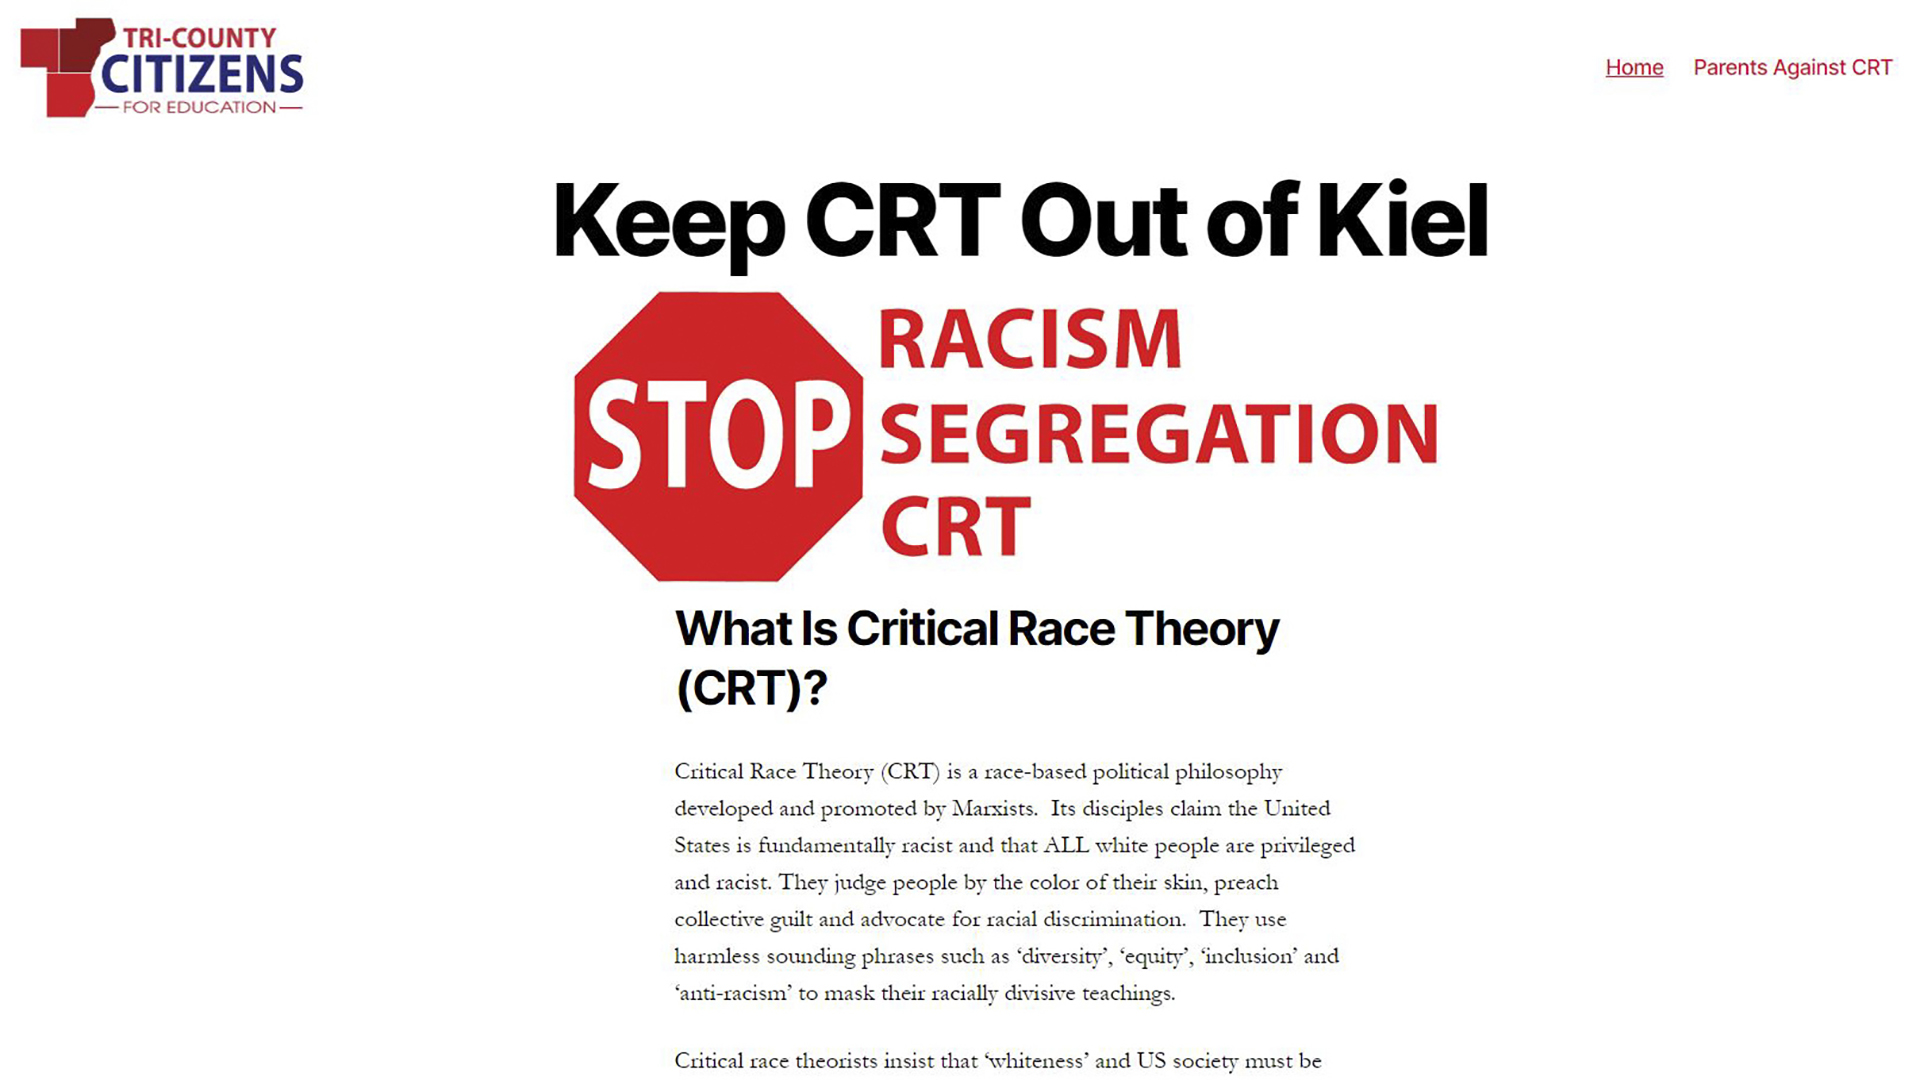 A screenshot from a website shows the headline "Keep CRT Out of Kiel" above a stop sign and the words "Racism," "Segregation," and "CRT," above a FAQ-style question and response about "What is Critical Race Theory (CRT)?"